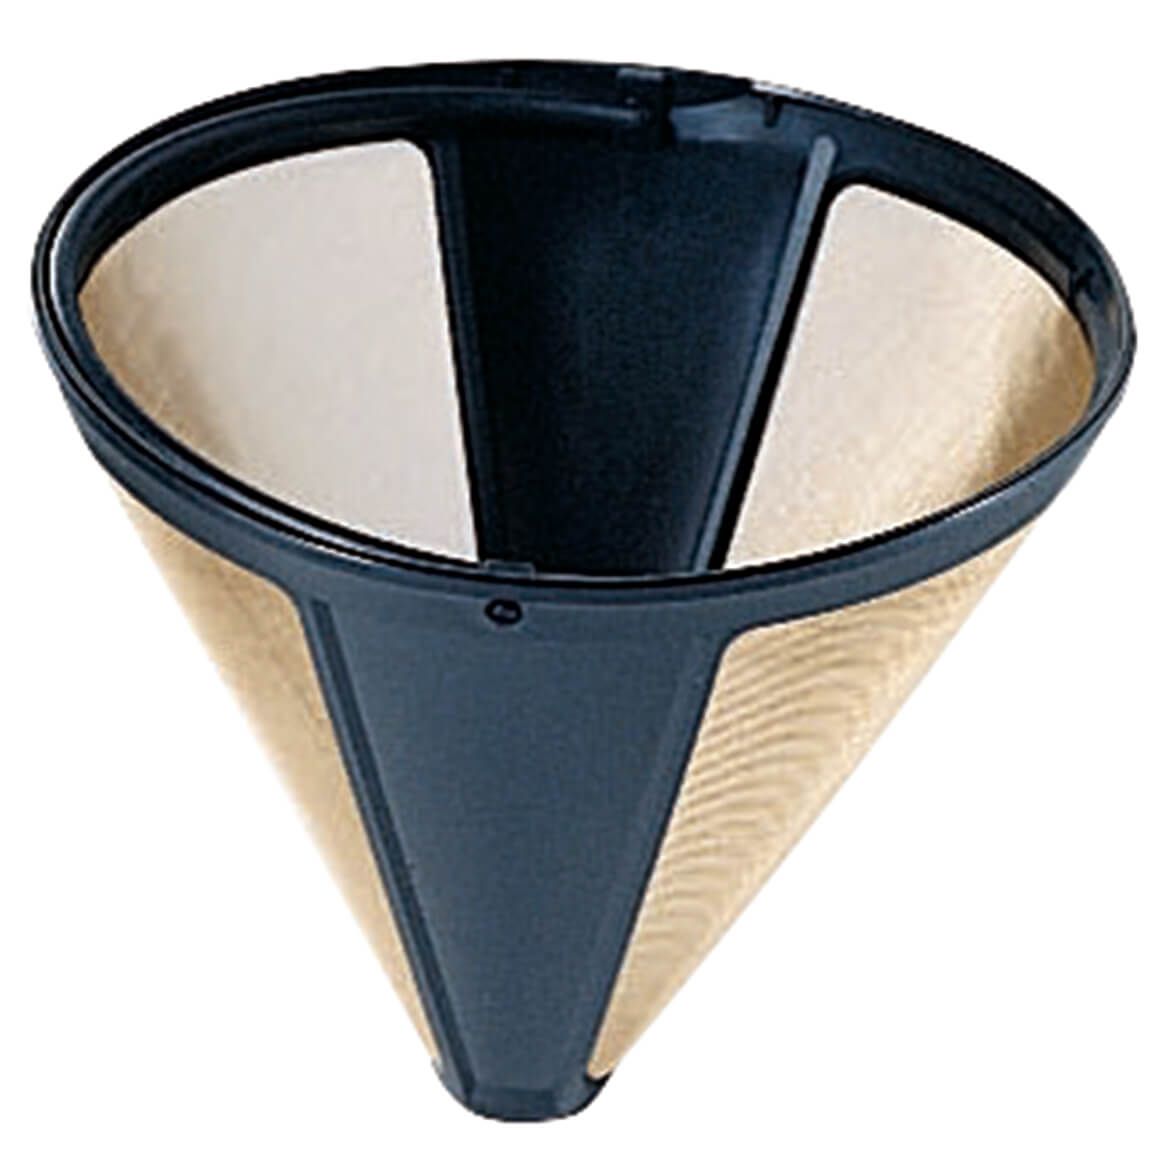 Universal Coffee Filter #4 Cone Filter + '-' + 303765